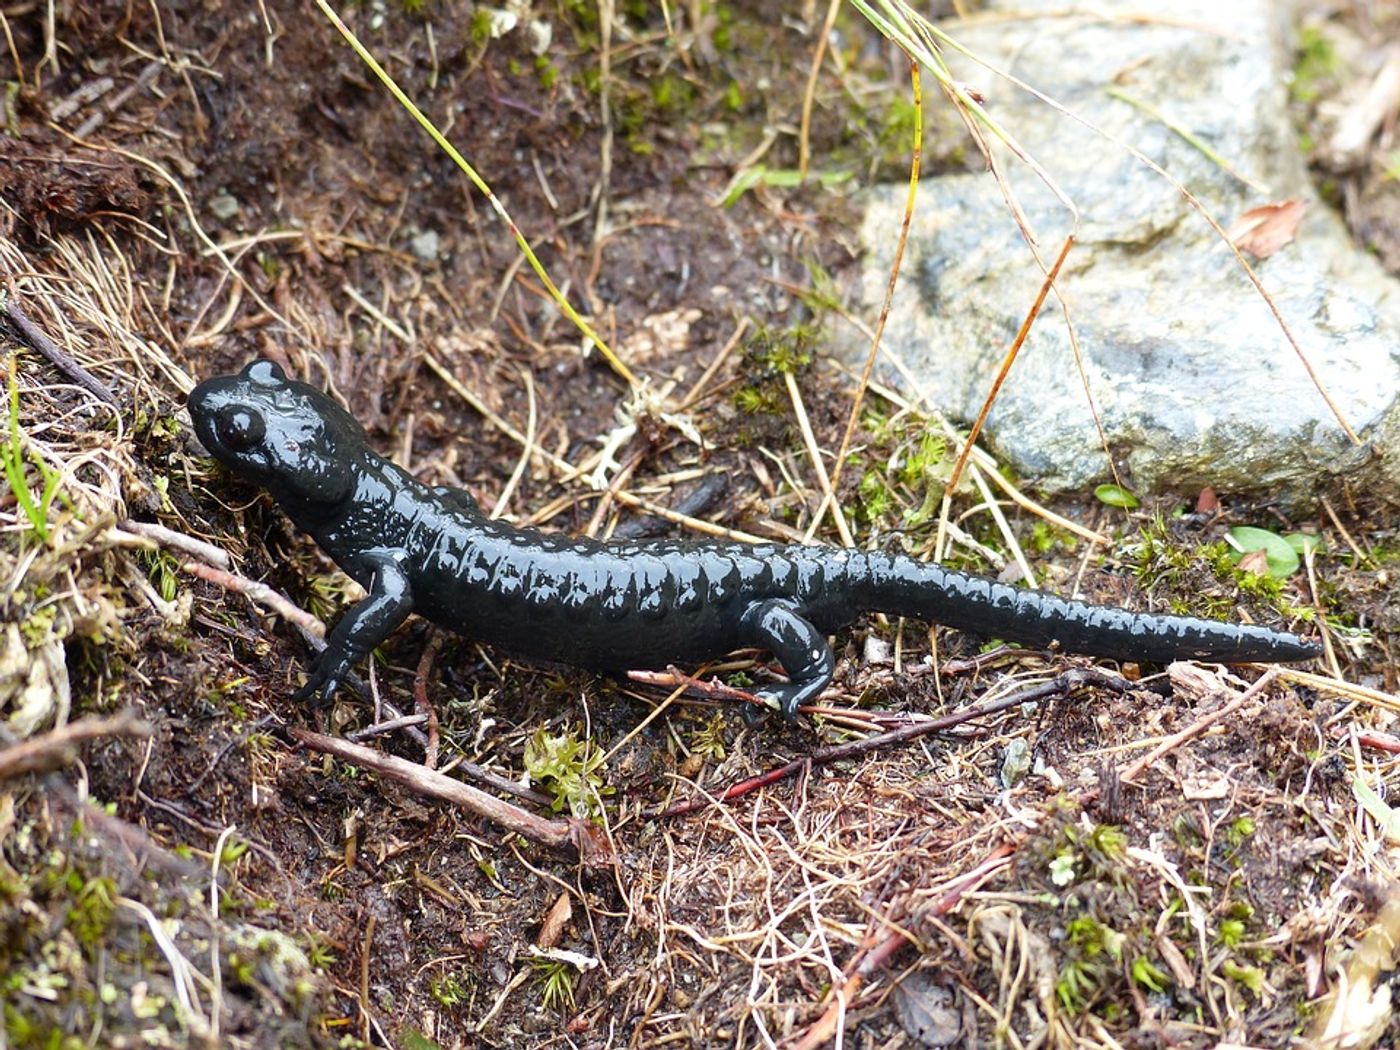 Will salamanders show more resistance to climate change than initially thought?